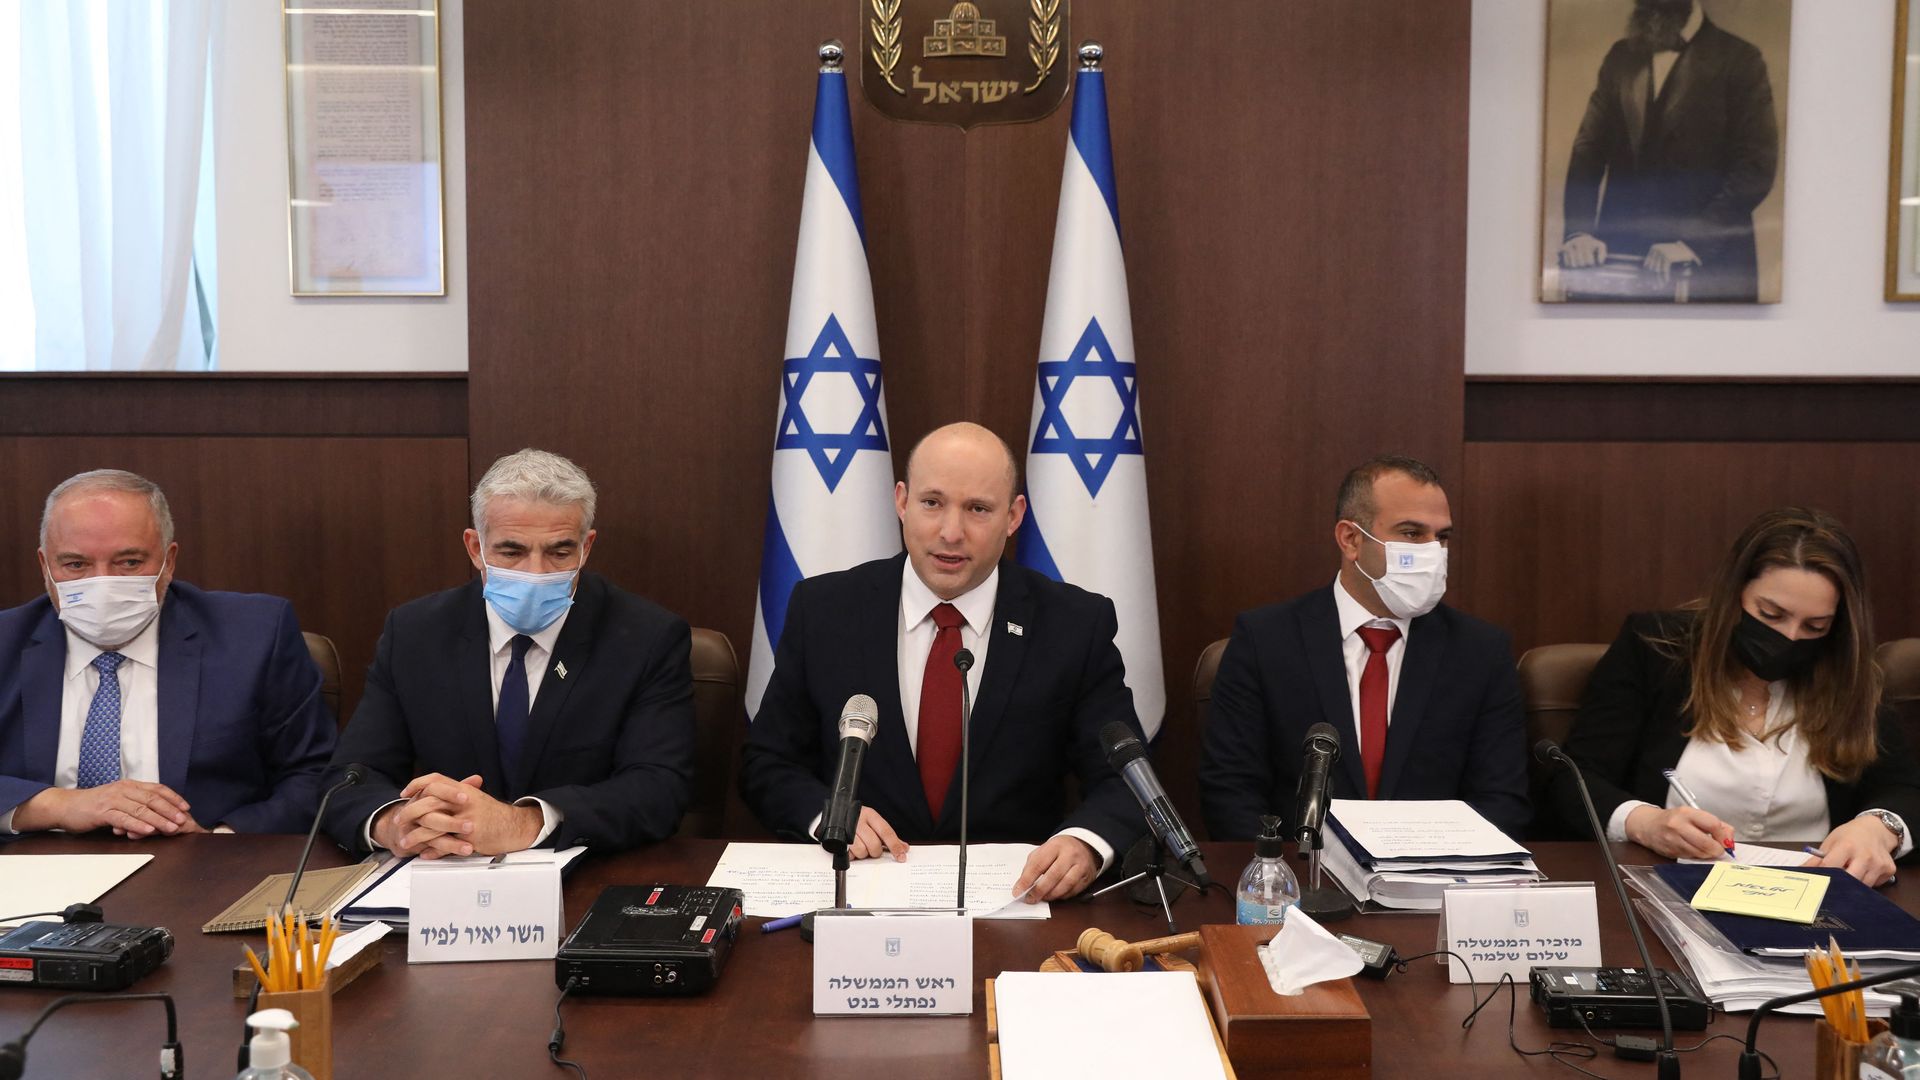  Israel's Finance Minister Avigdor Lieberman (L), Foreign Minister Yair Lapid, and Prime Minister Naftali Bennett (C) attend the weekly cabinet meeting in Jerusalem on August 1